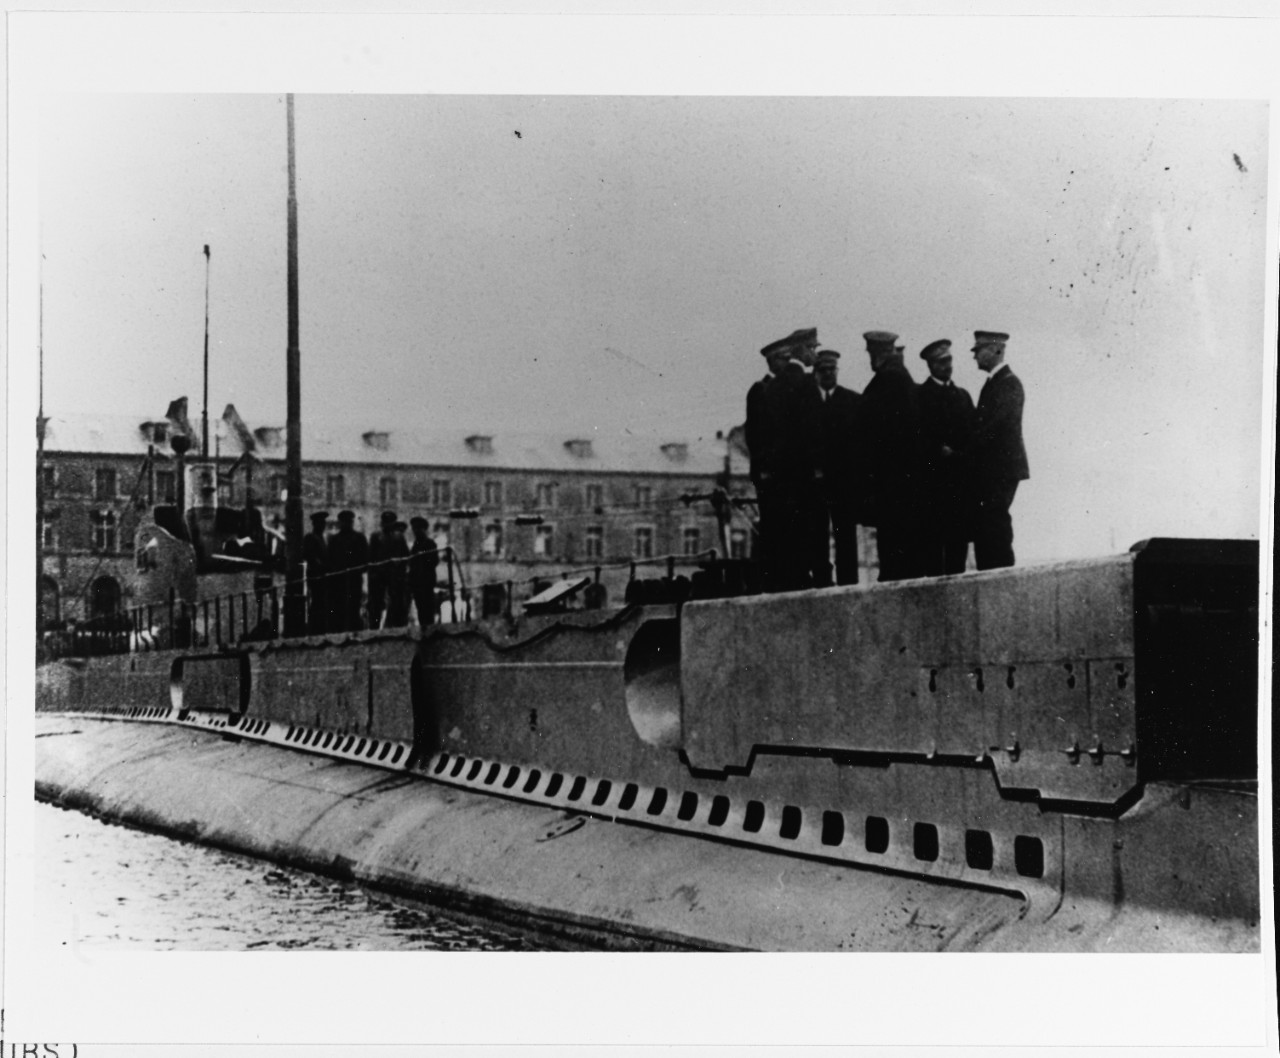 A French "1500-ton" type submarine in a French Navy Yard in the 1930s. 